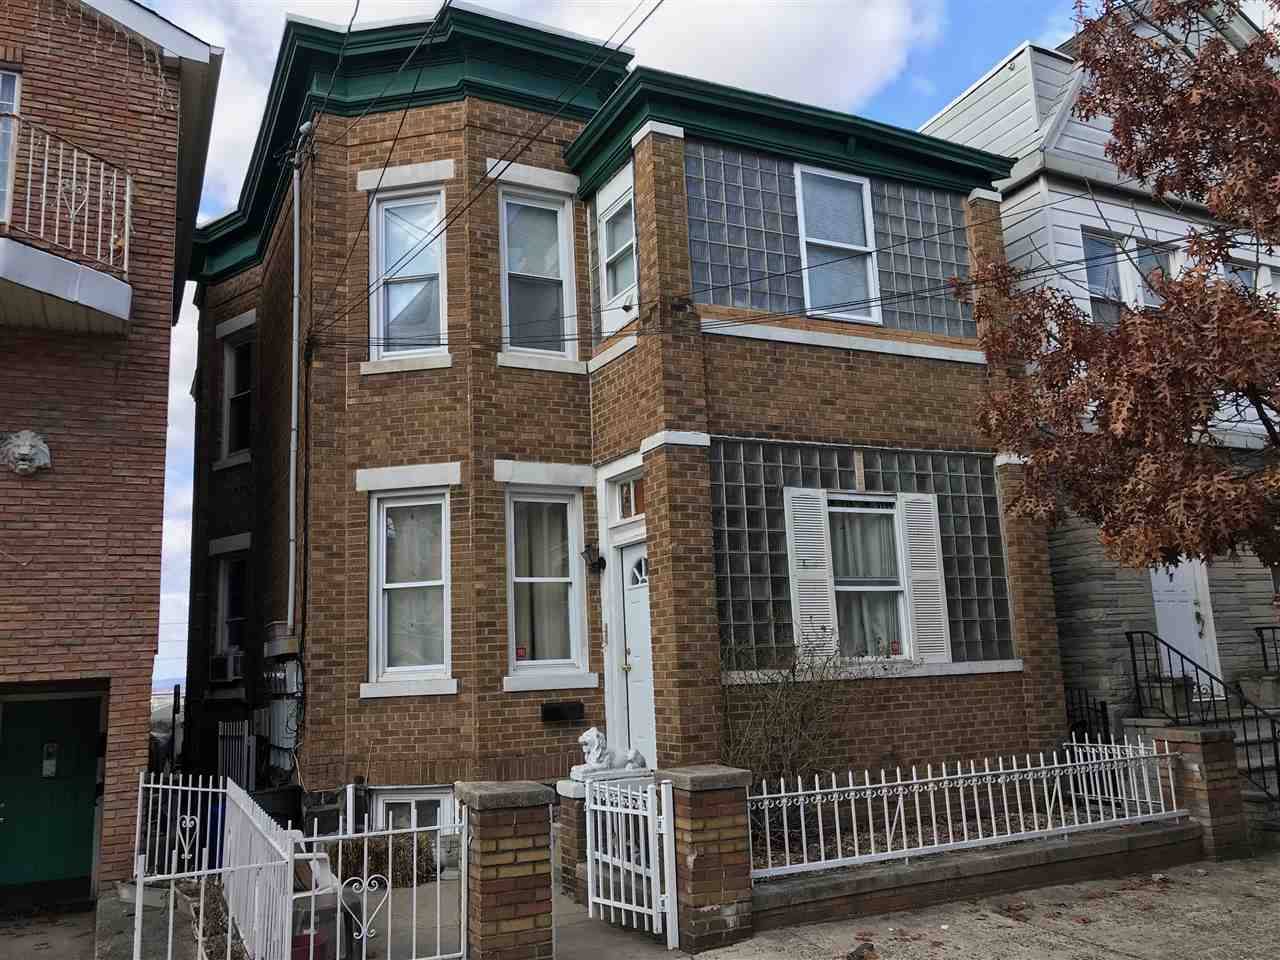 175 COLUMBIA AVE Multi-Family New Jersey